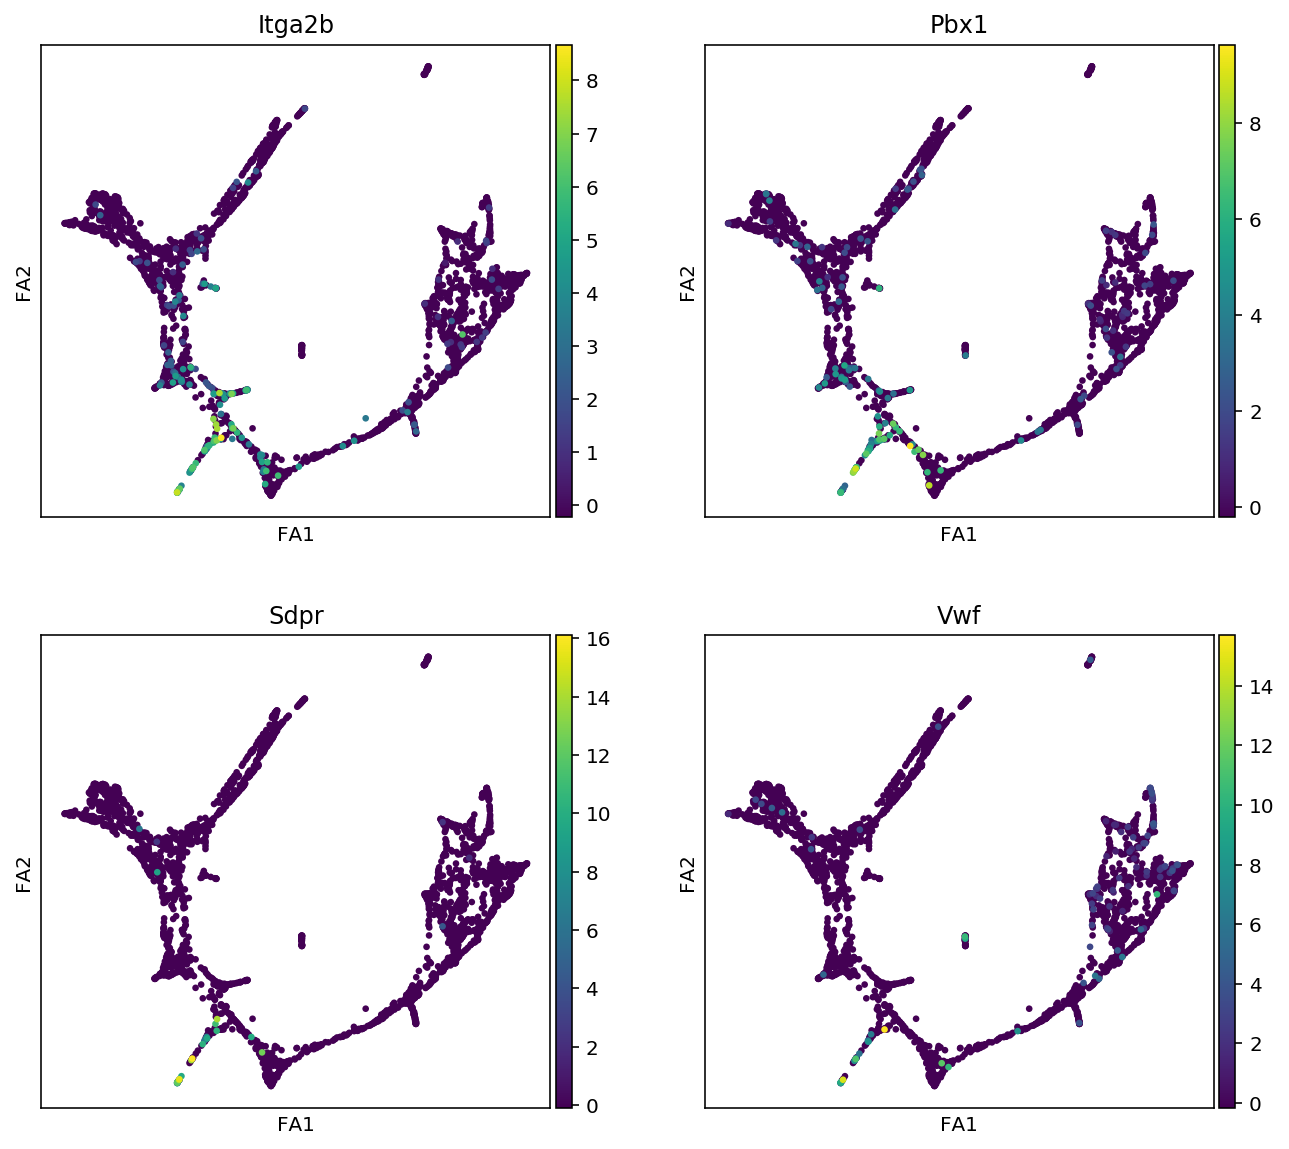 ../../_images/notebooks_03_scRNA-seq_data_preprocessing_scanpy_preprocessing_with_Paul_etal_2015_data_26_1.png